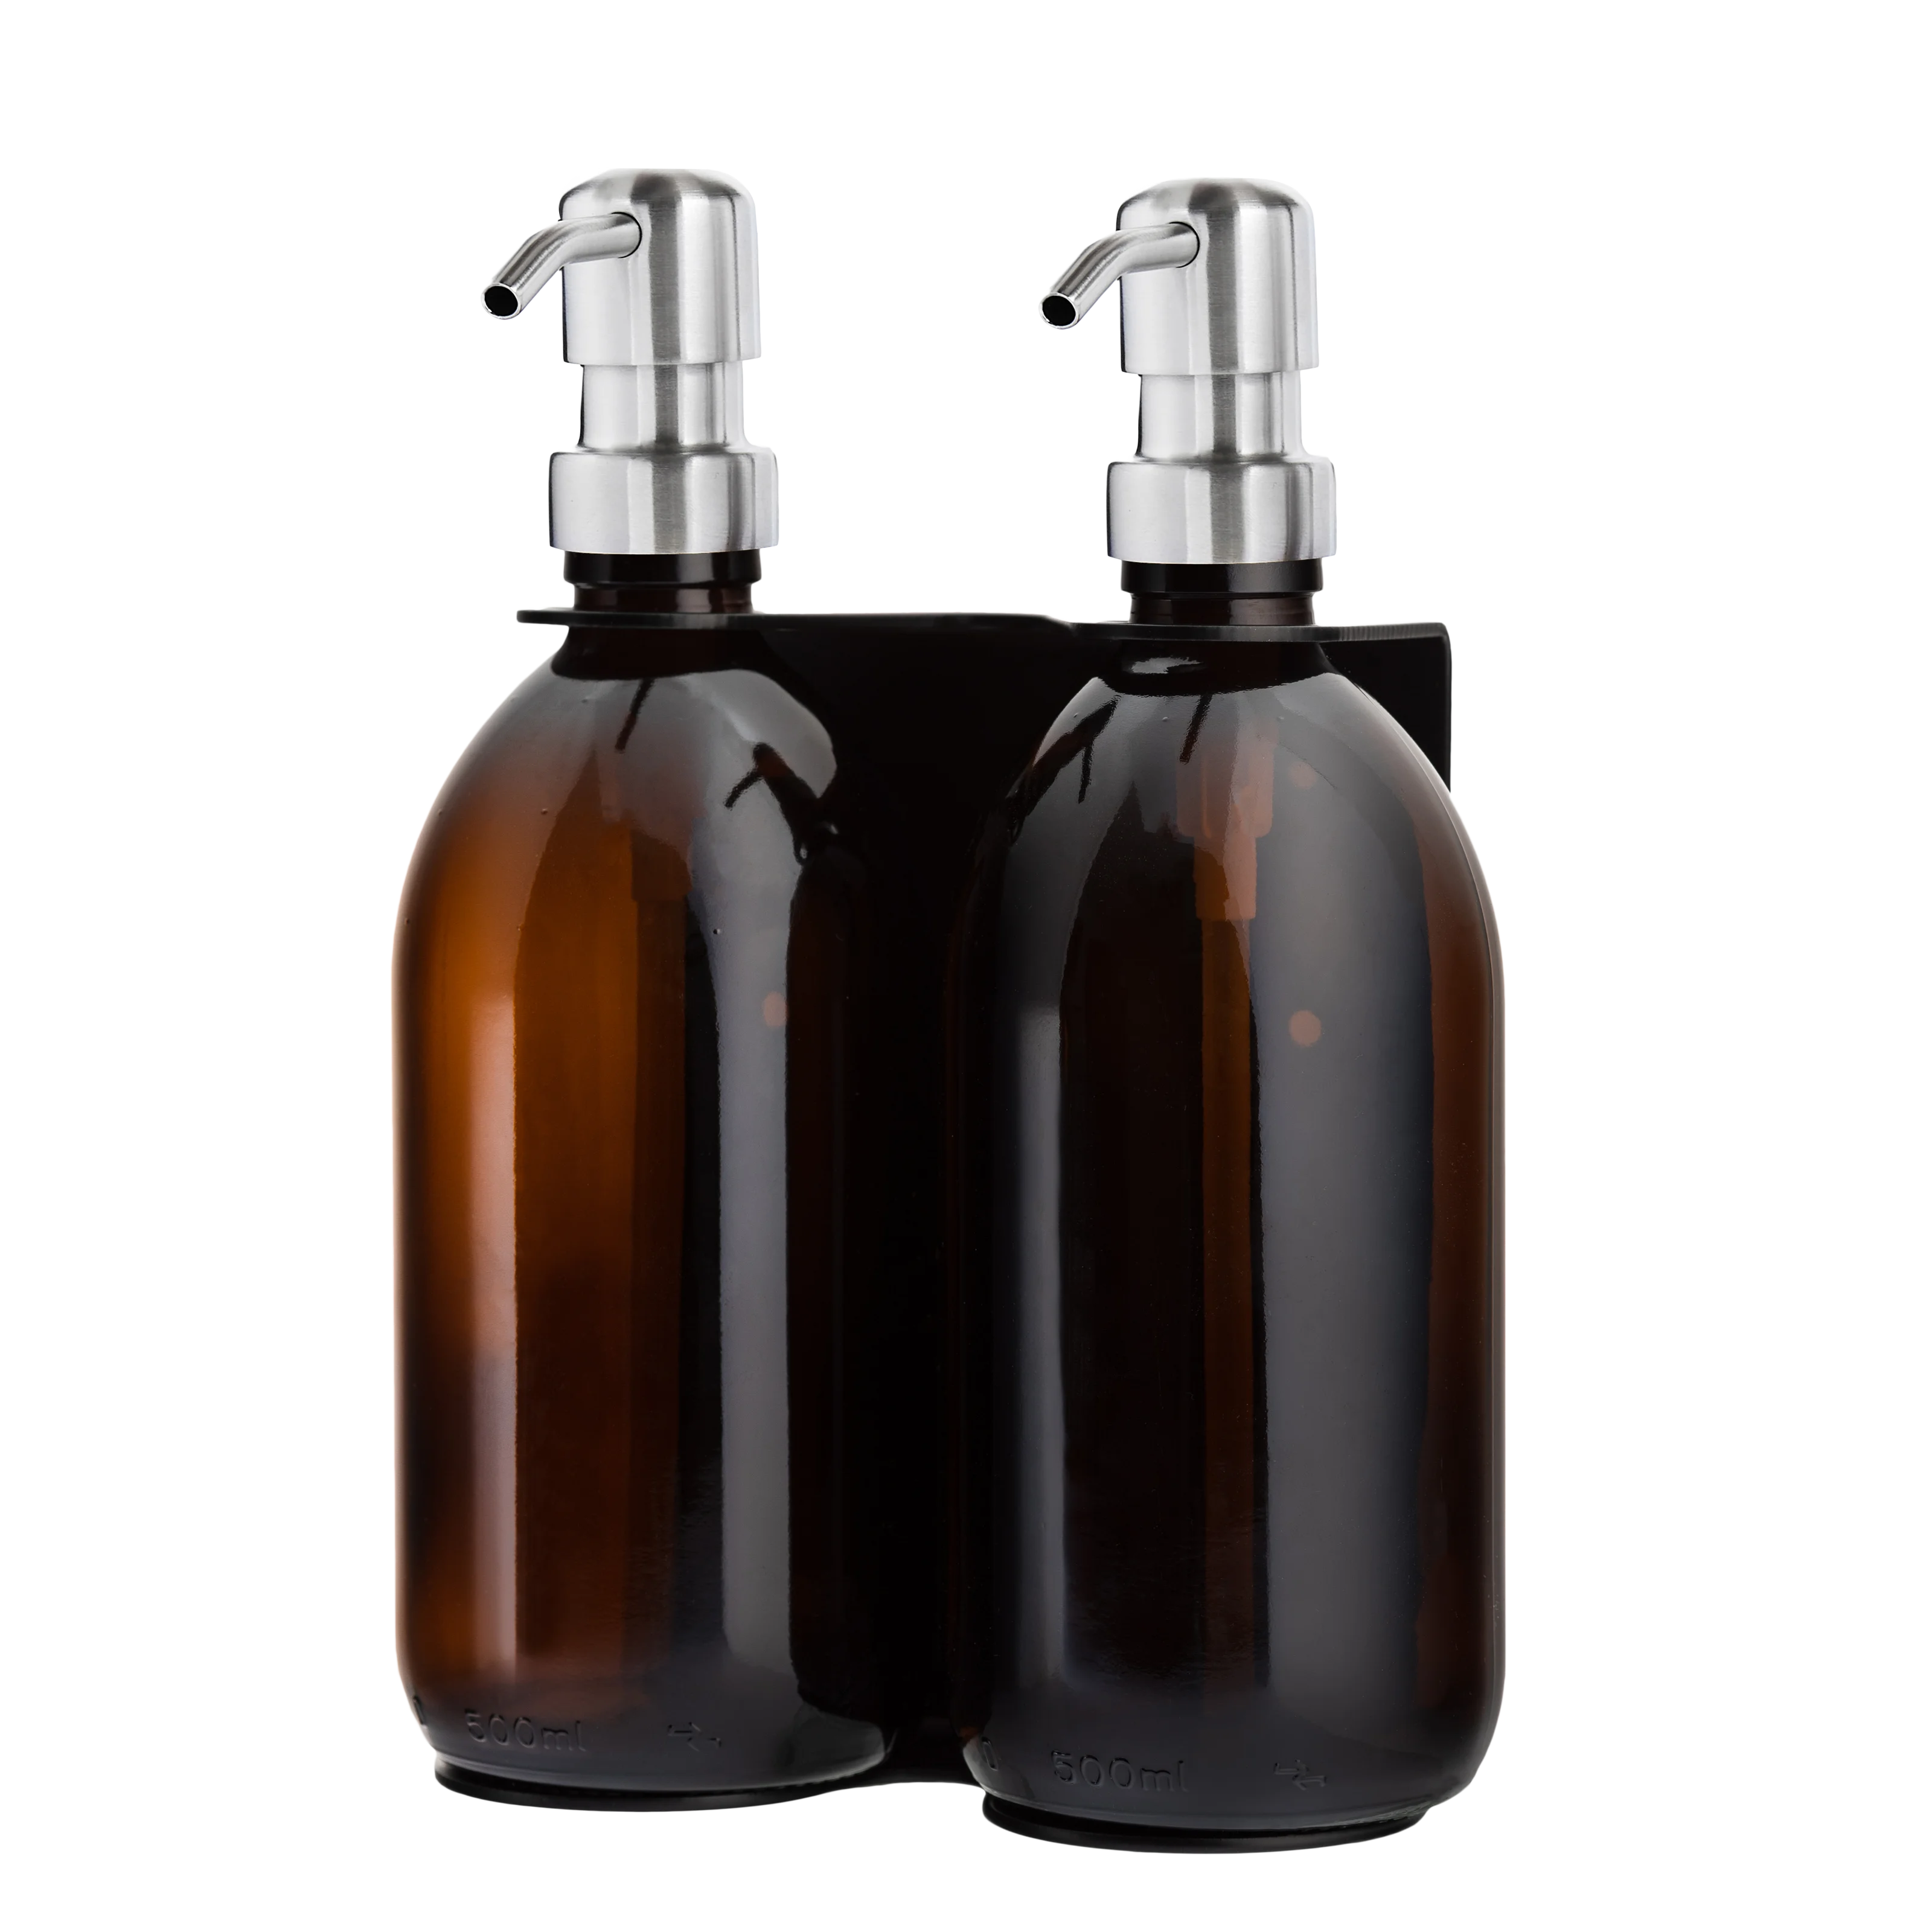 Black Double Wall Mounted Soap Dispenser 500ml Silver